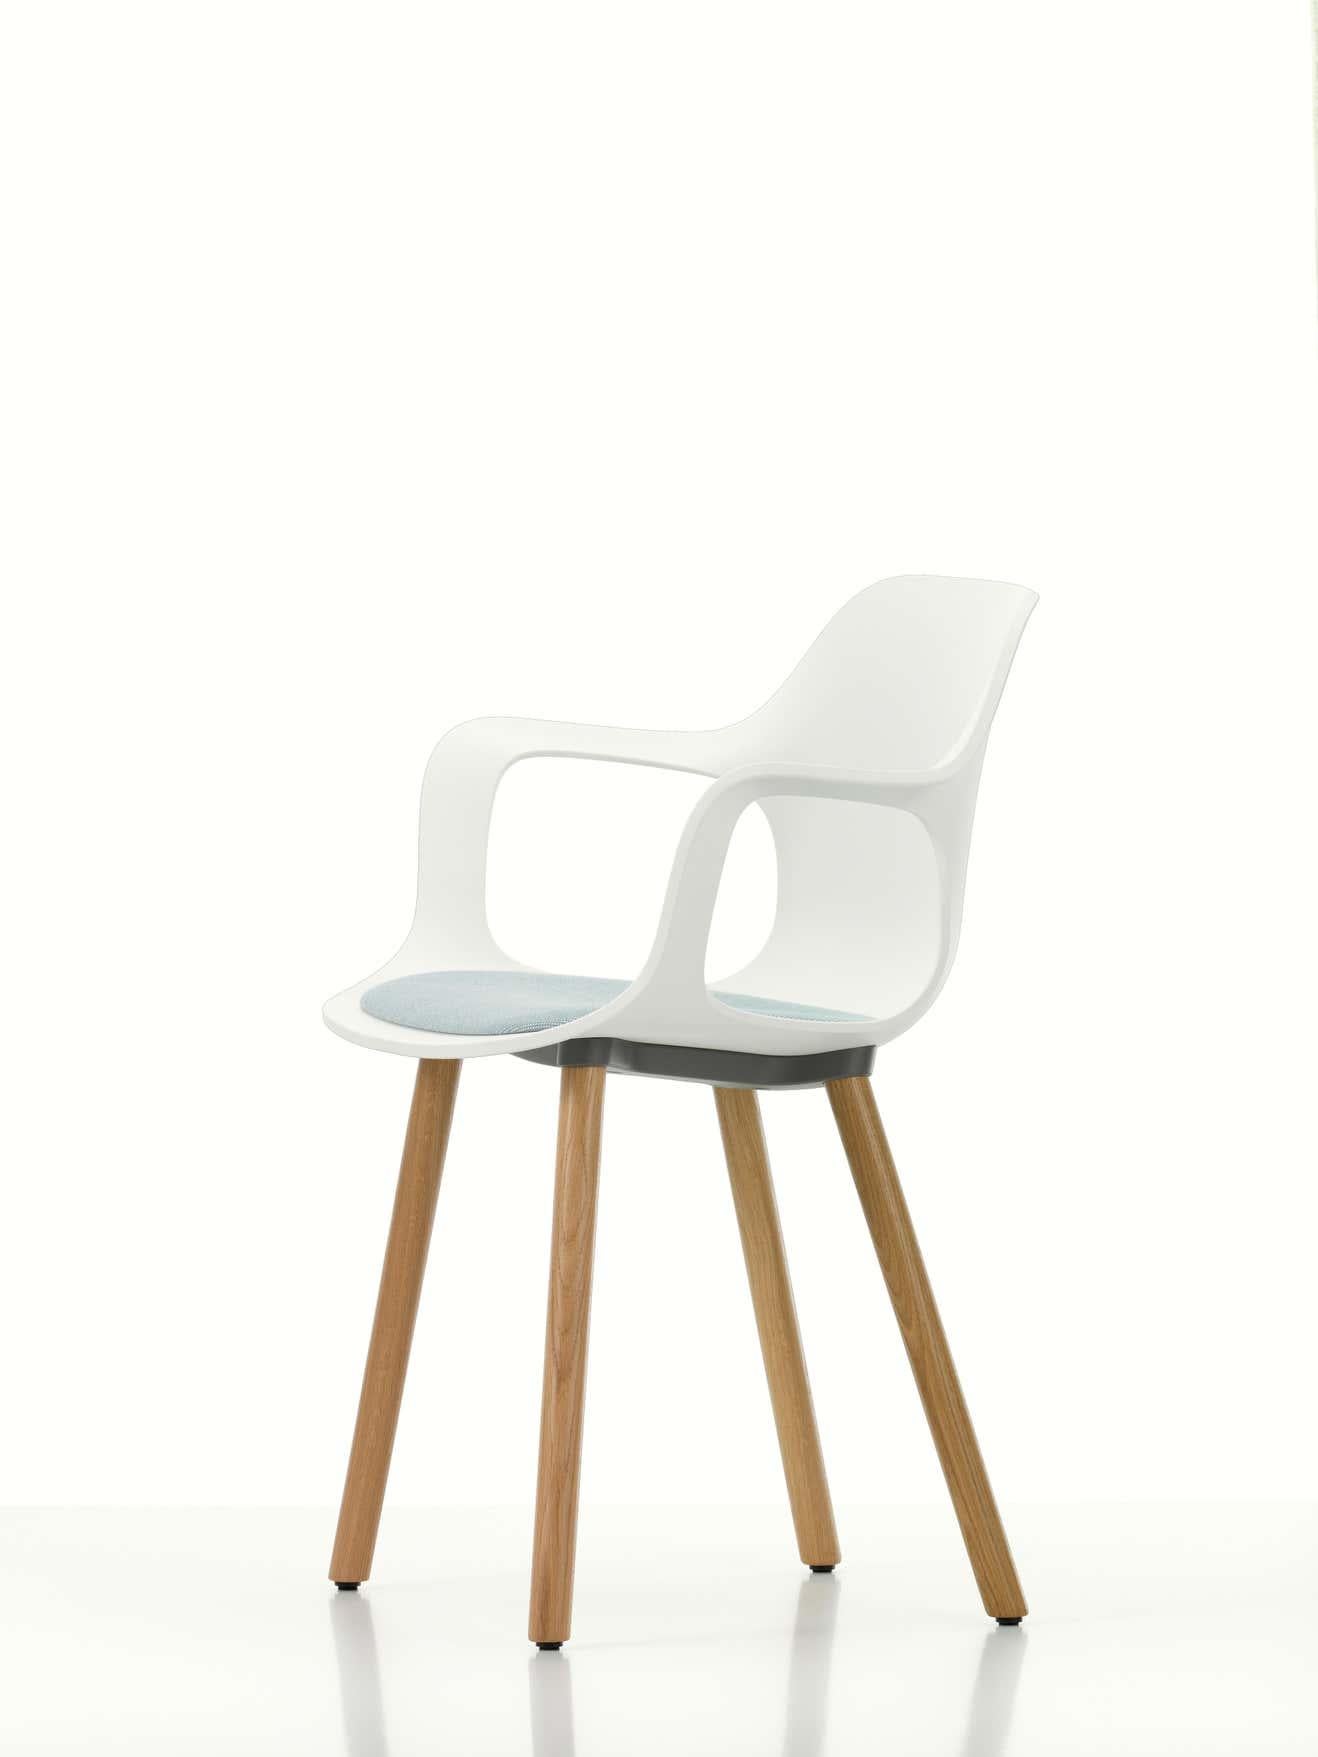 Vitra HAL armchair wood with seat upholstery in white by Jasper Morrison.

Materials:
Seat shell: Dyed-through polypropylene, with seat cushion (screwed to the seat shell).
Base: Non-stackable wooden base in natural oak Connecting element